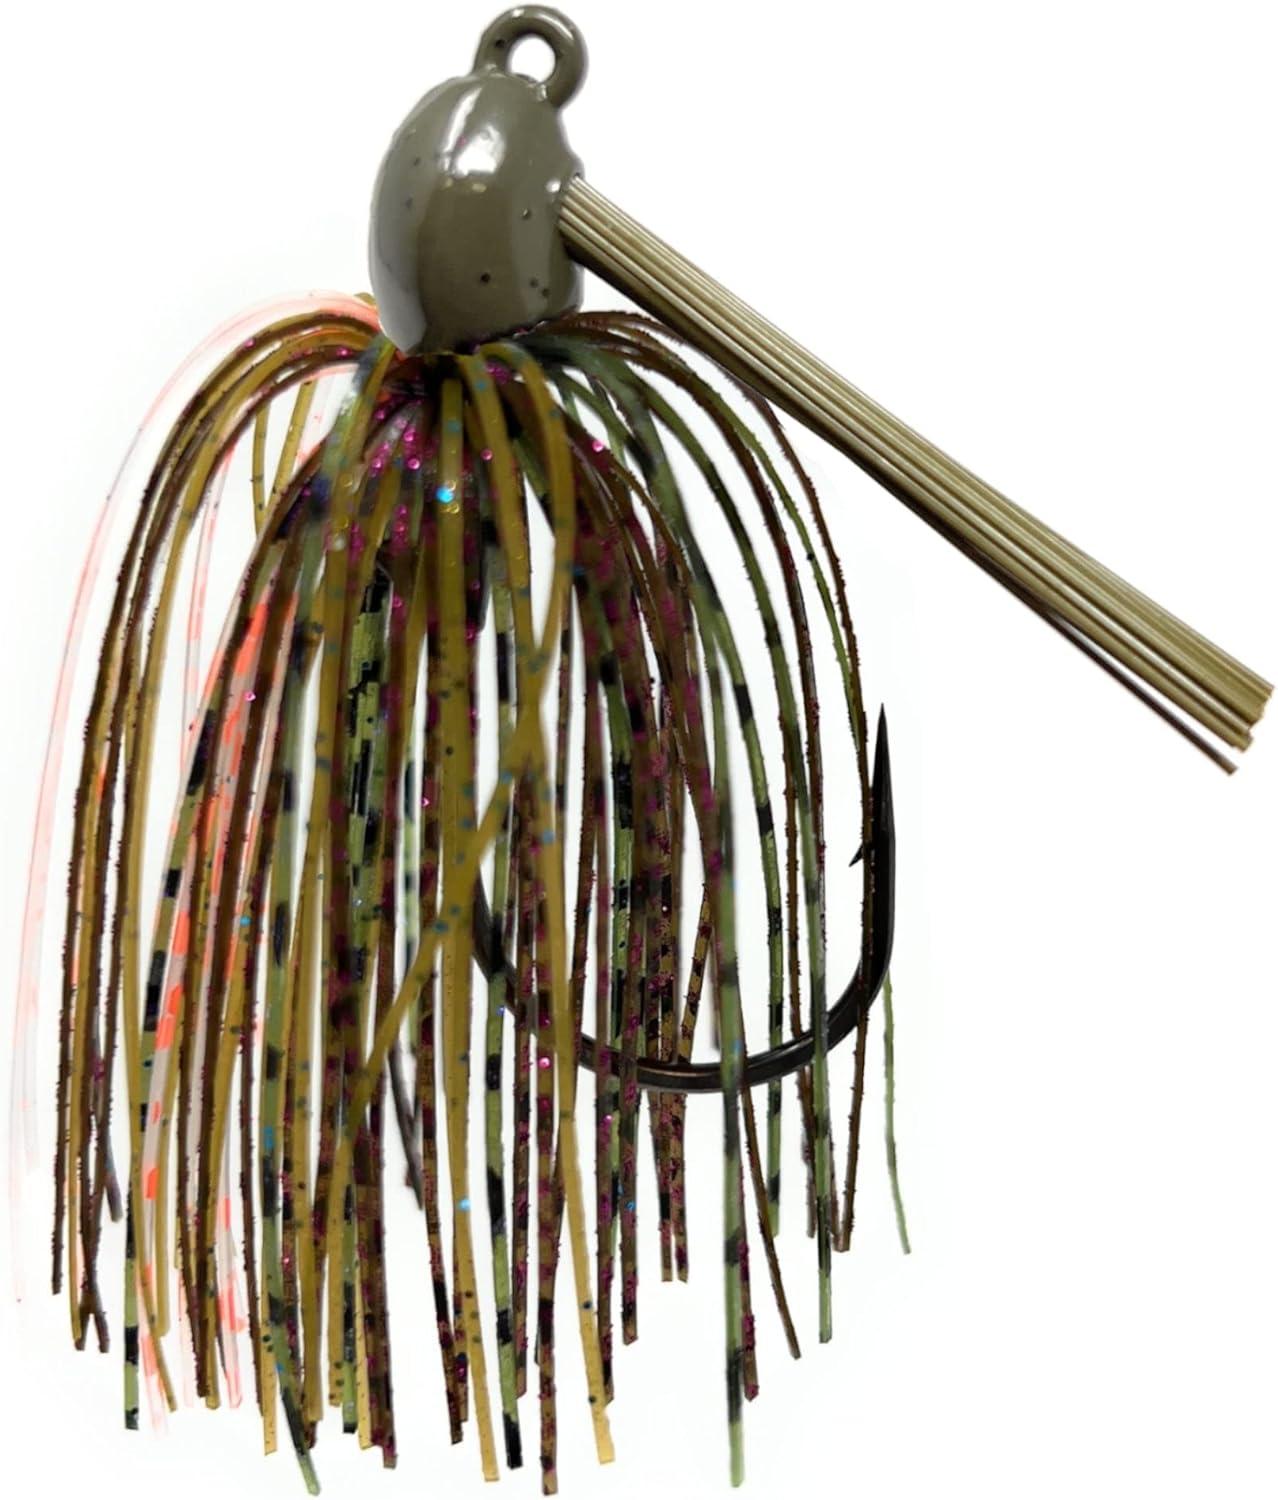 Reaction Tackle Tungsten Football Jigs (2-Pack)